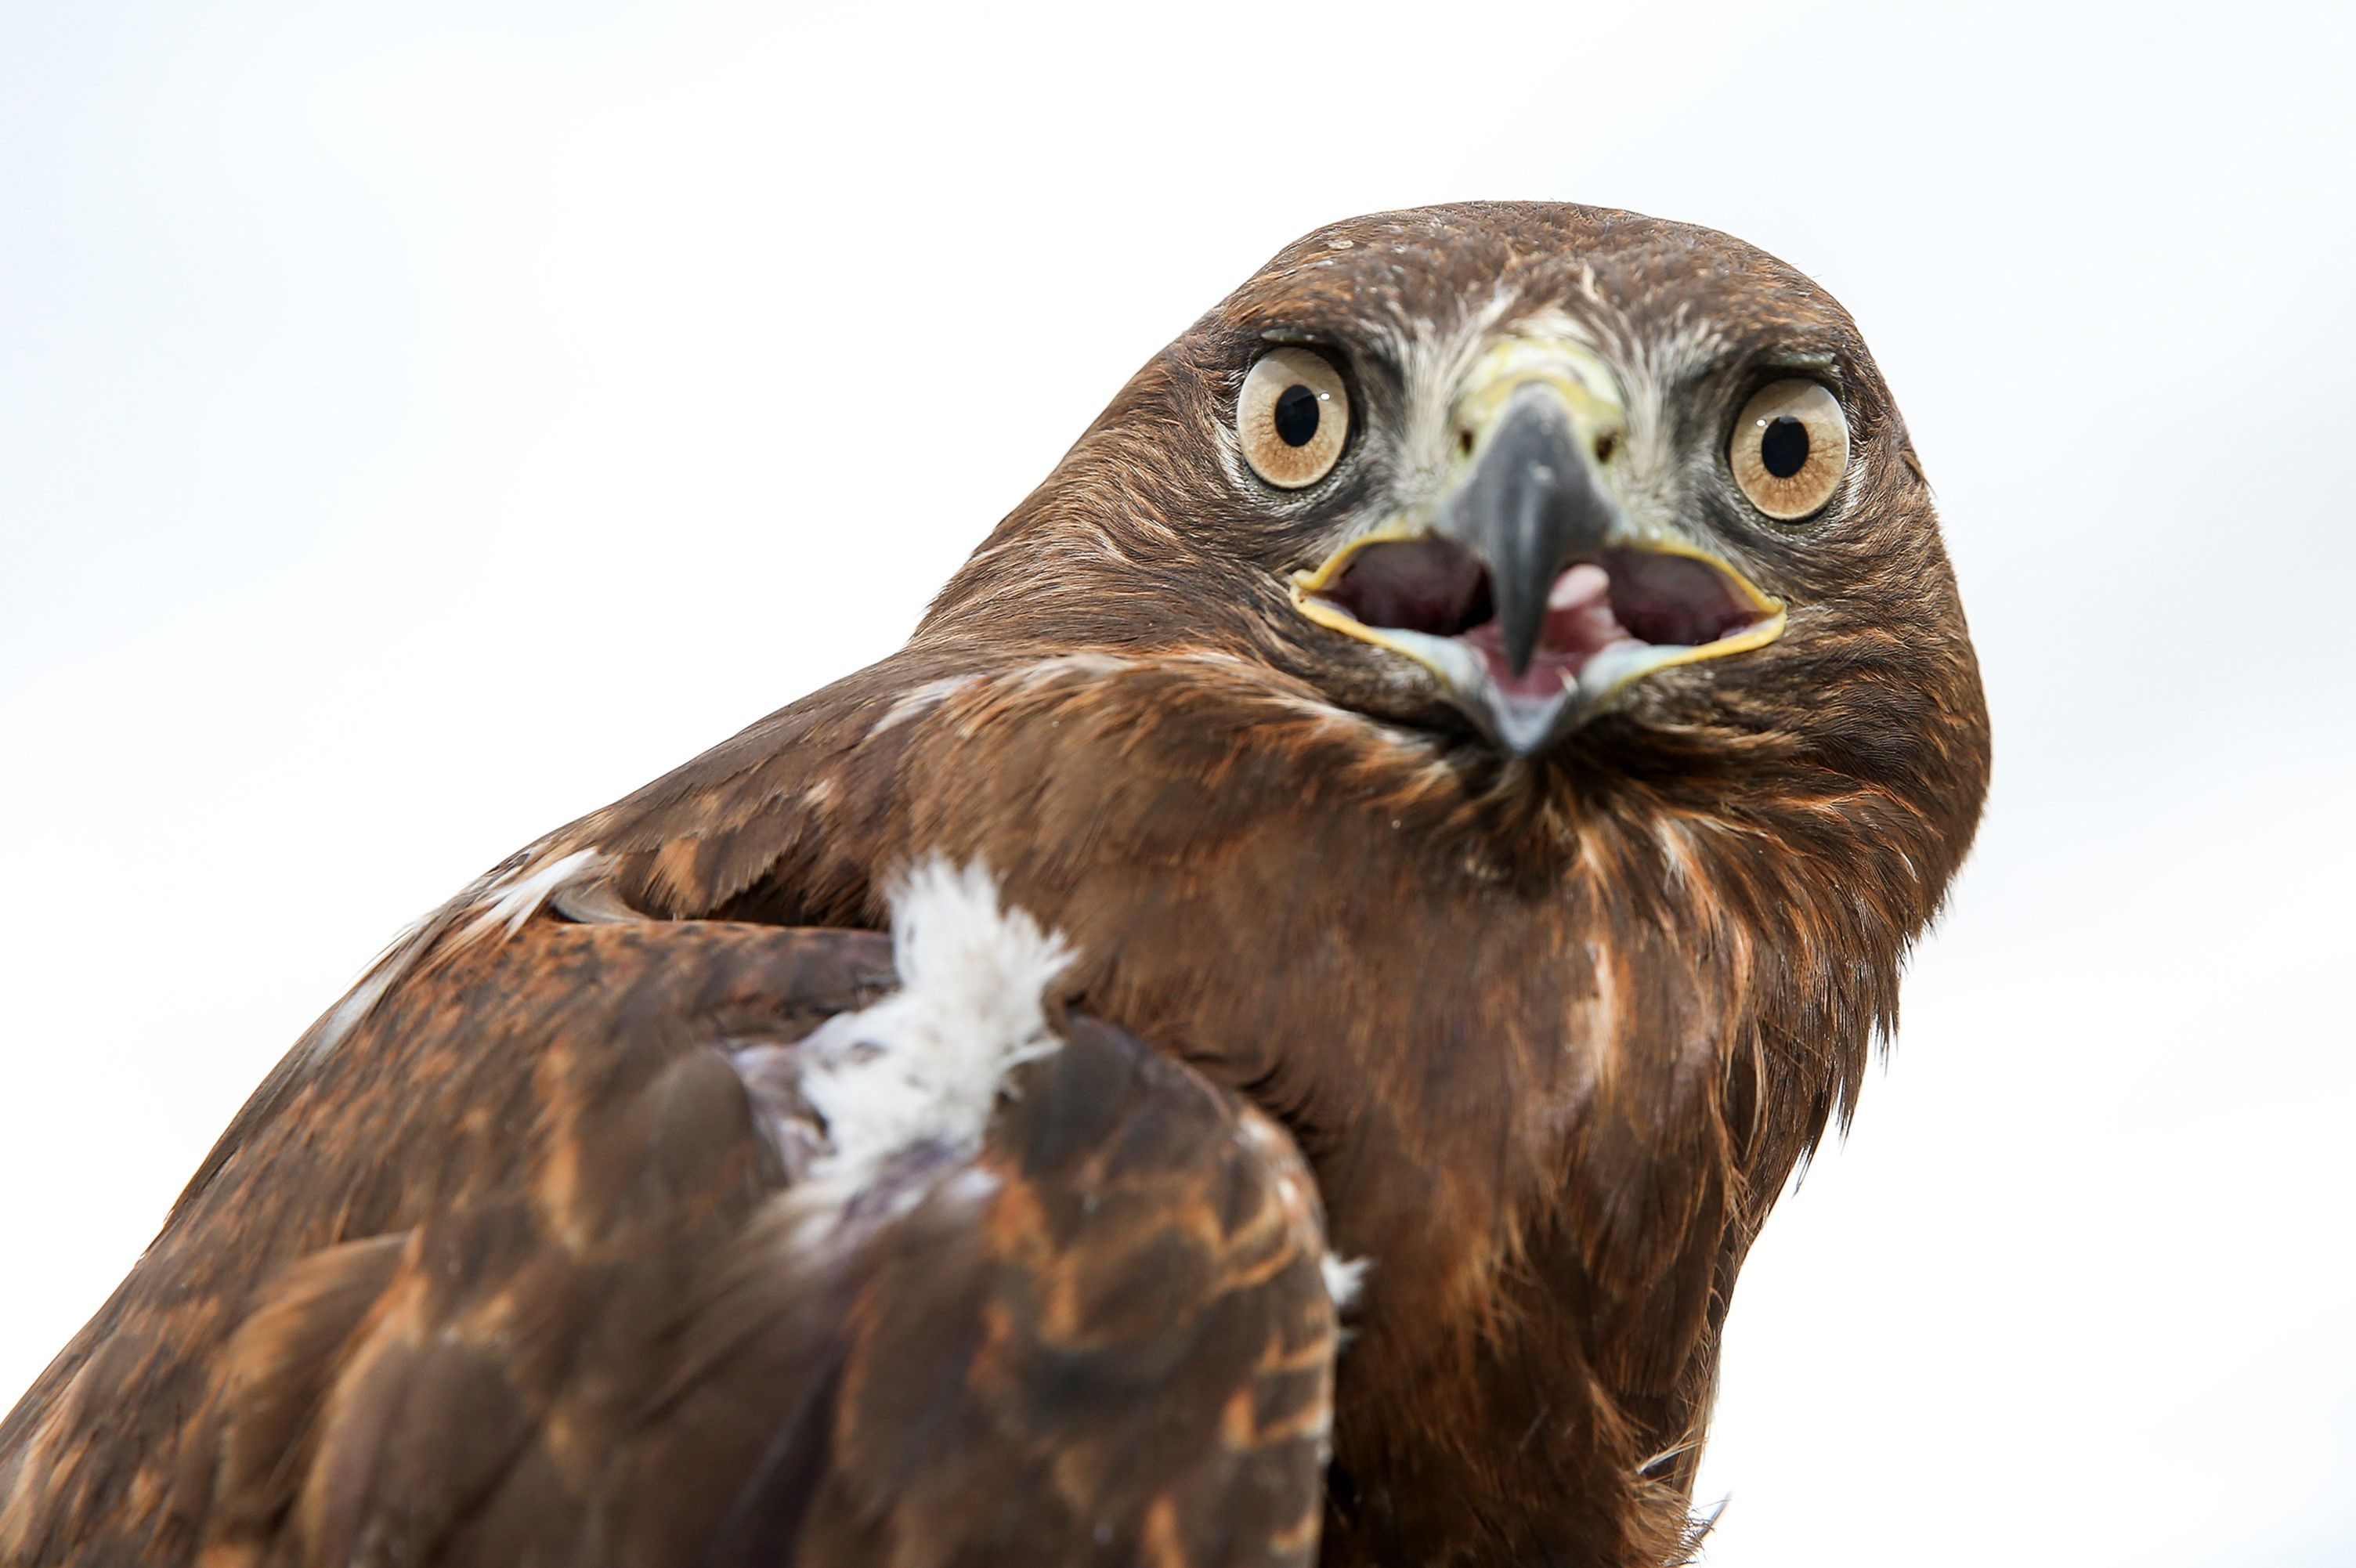 This New York Hawk Love Triangle Proves Love Is Dead